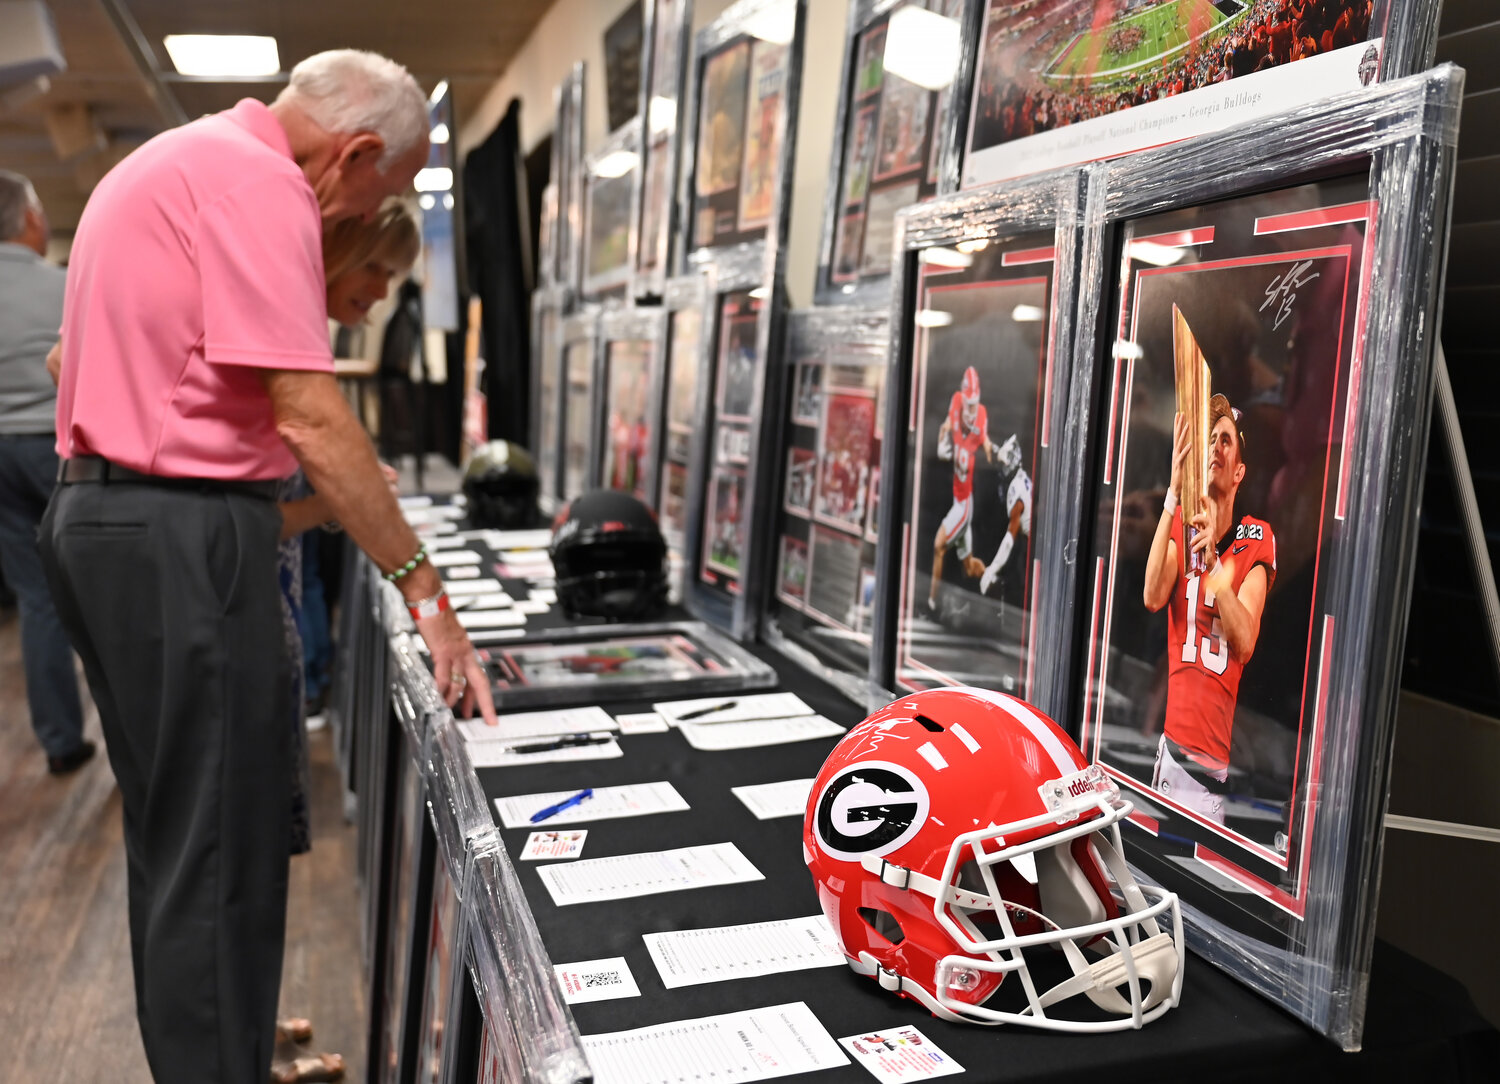 Rudy and Diane Maul look at sports memorabilia during a silent auction to raise money for the Fellowship of Christian Athletes at the UGA Night of Champions event on Friday at First Baptist Church of Woodstock. (Index/Henry Durand)